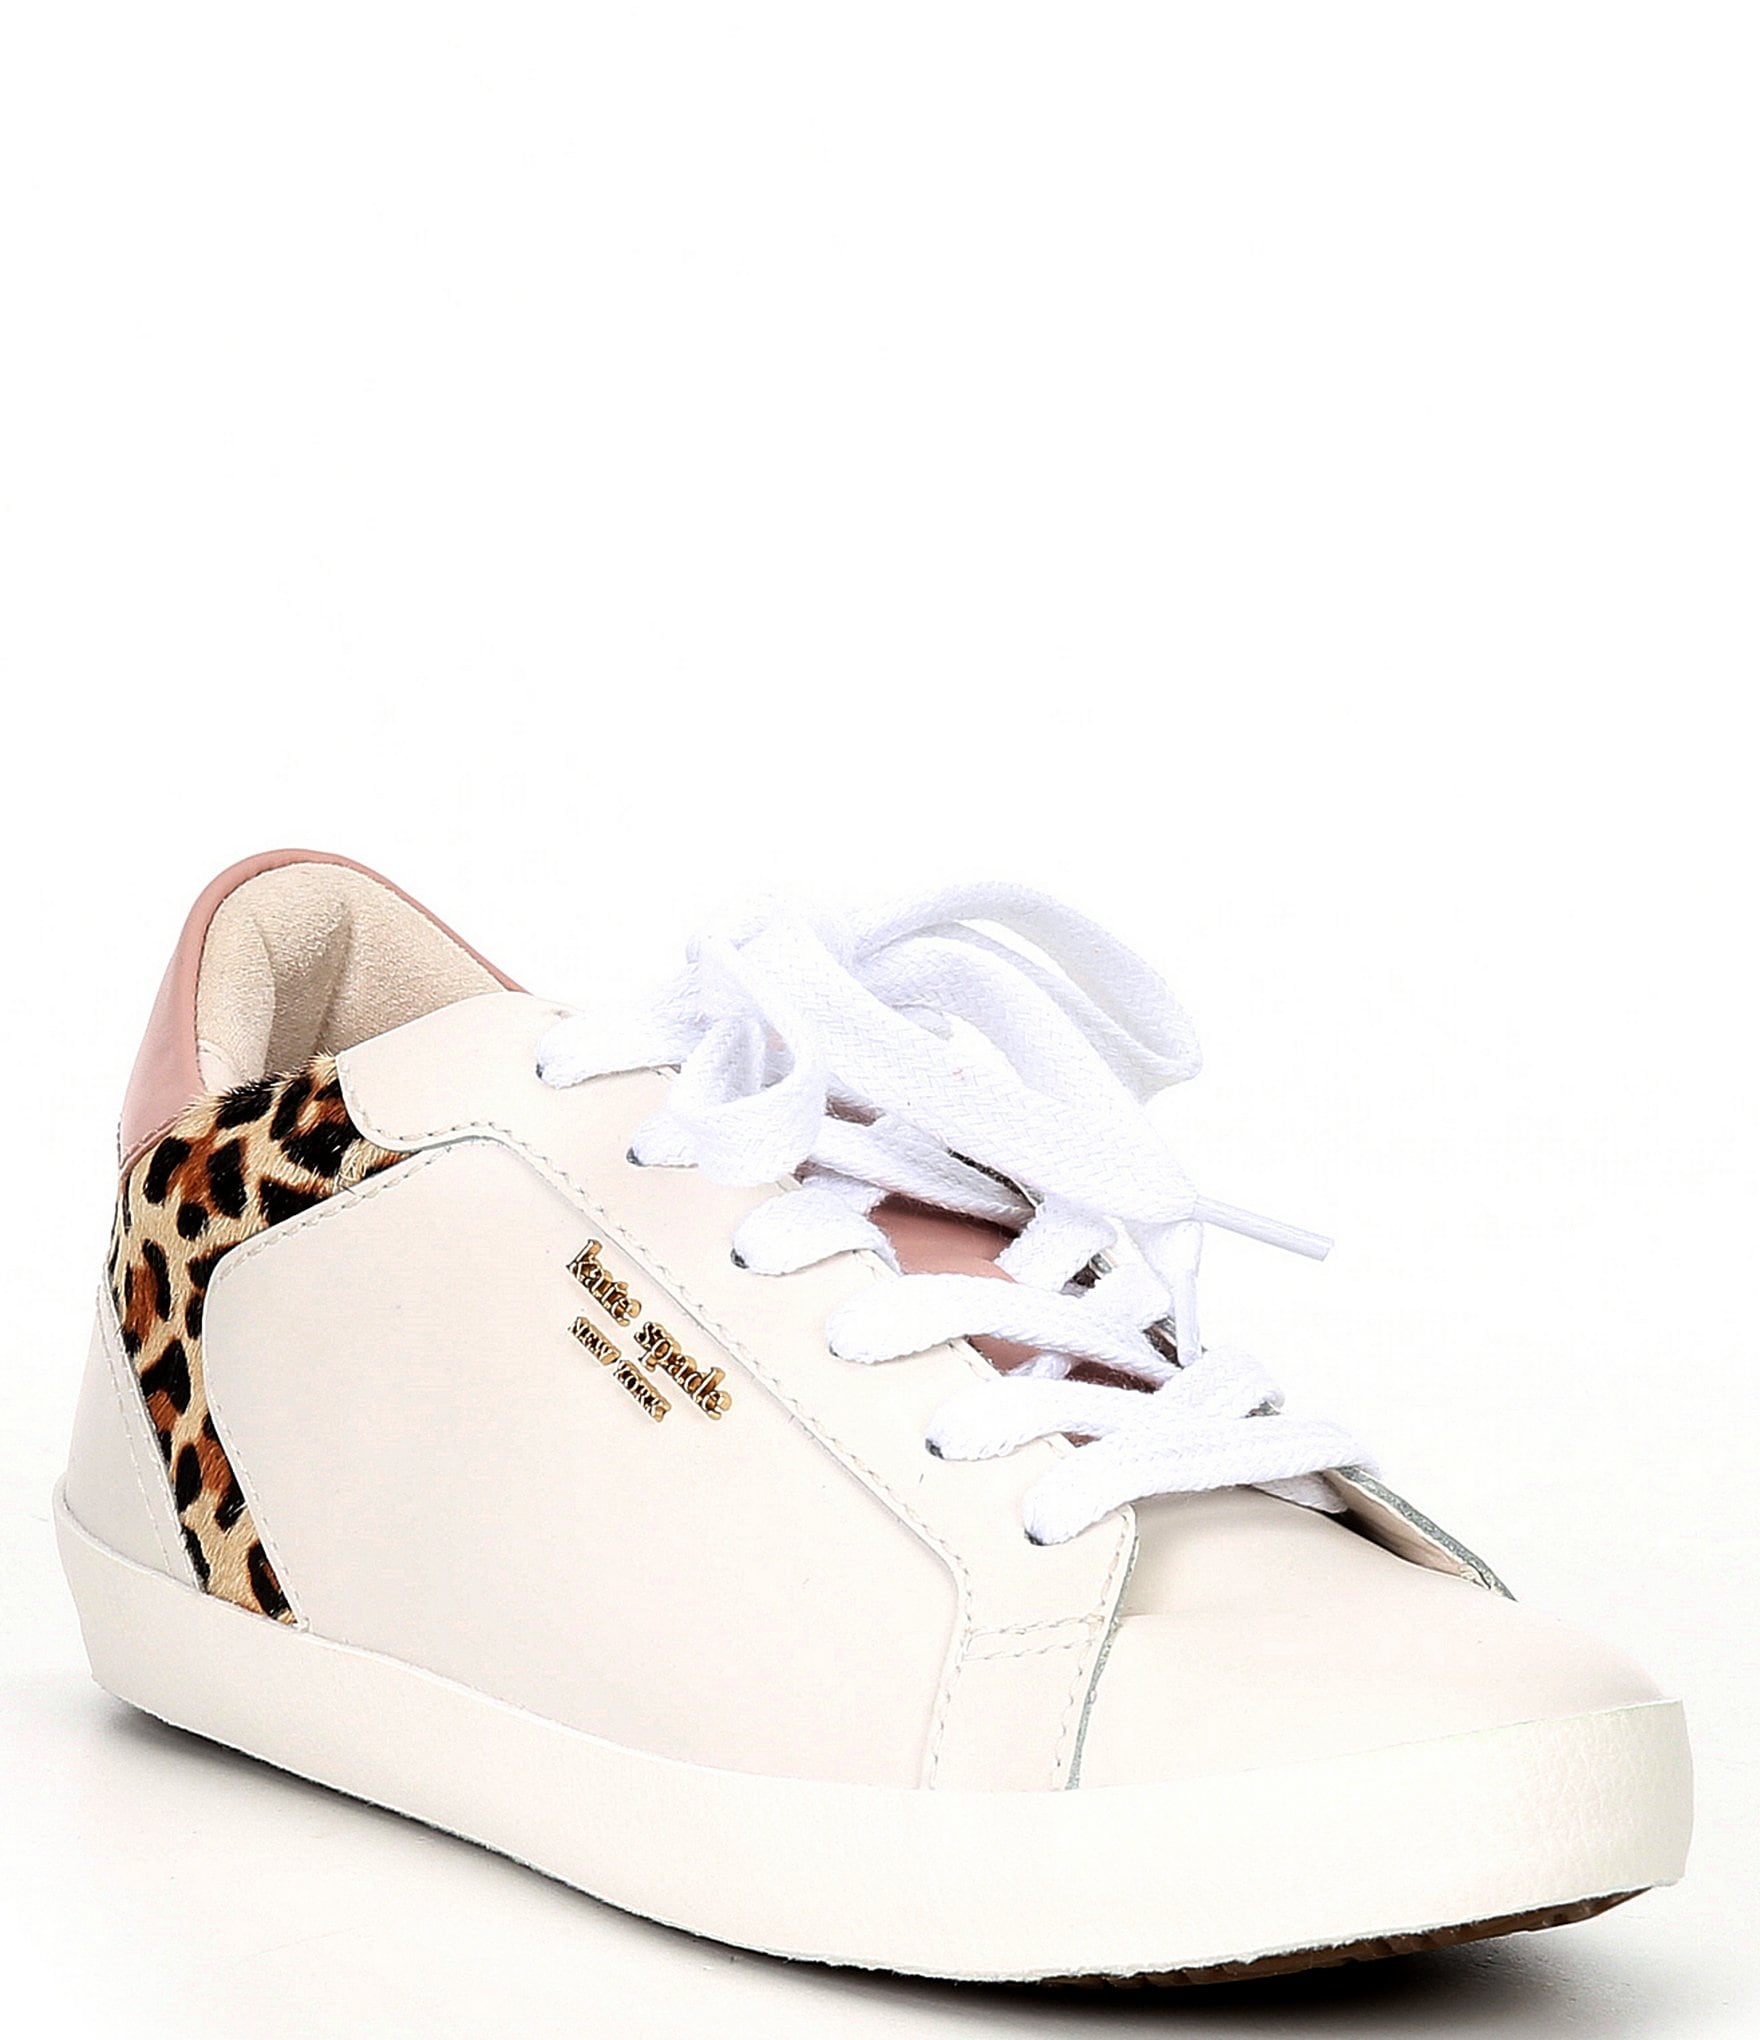 kate spade new york Ace Leopard Accent Leather Sneakers | Dillard's